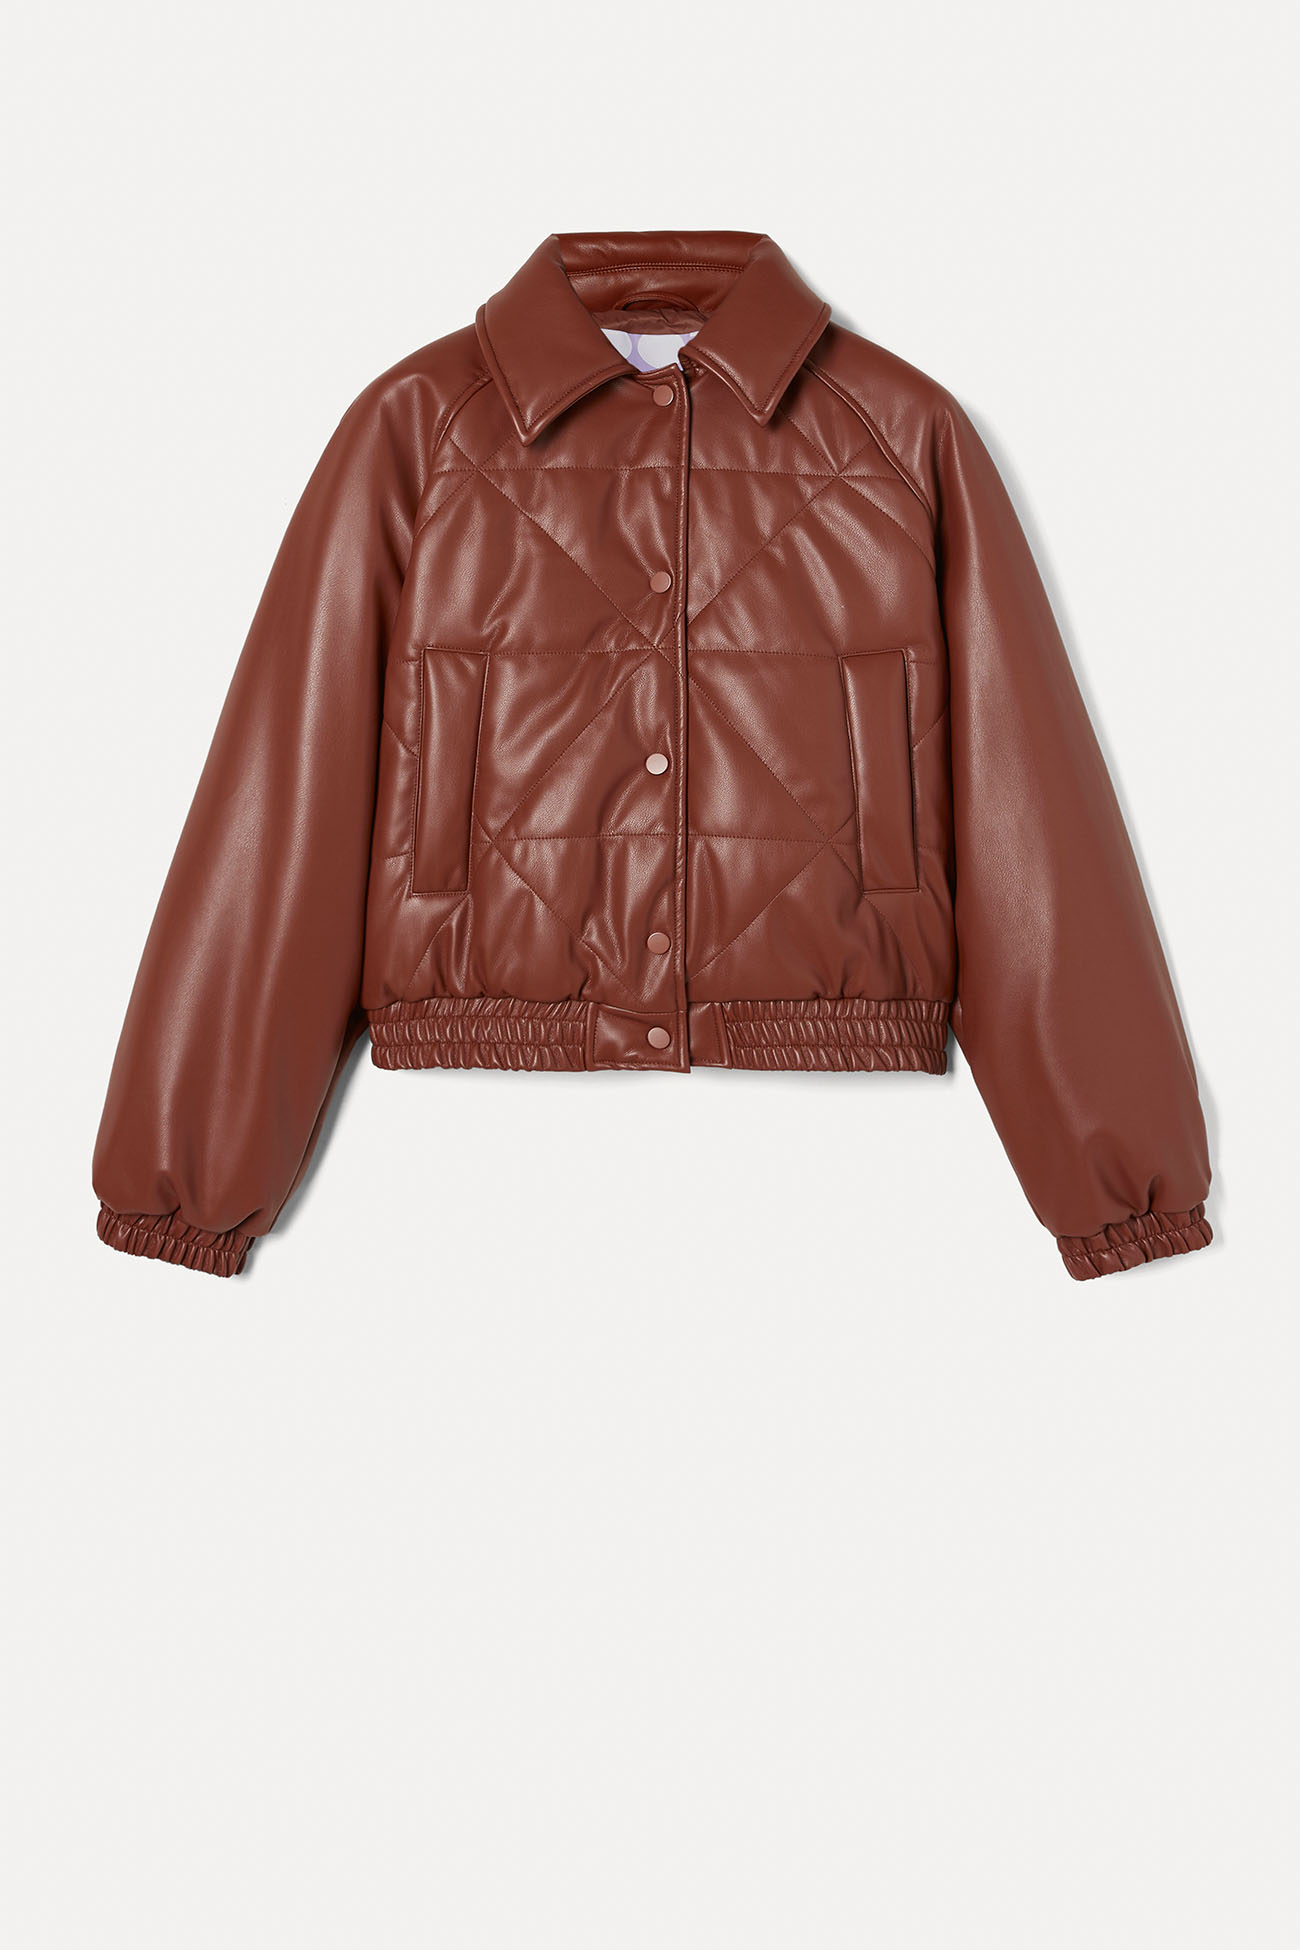 JACKET 9201 MADE IN ECO LEATHER - BURNT BROWN - OOF WEAR